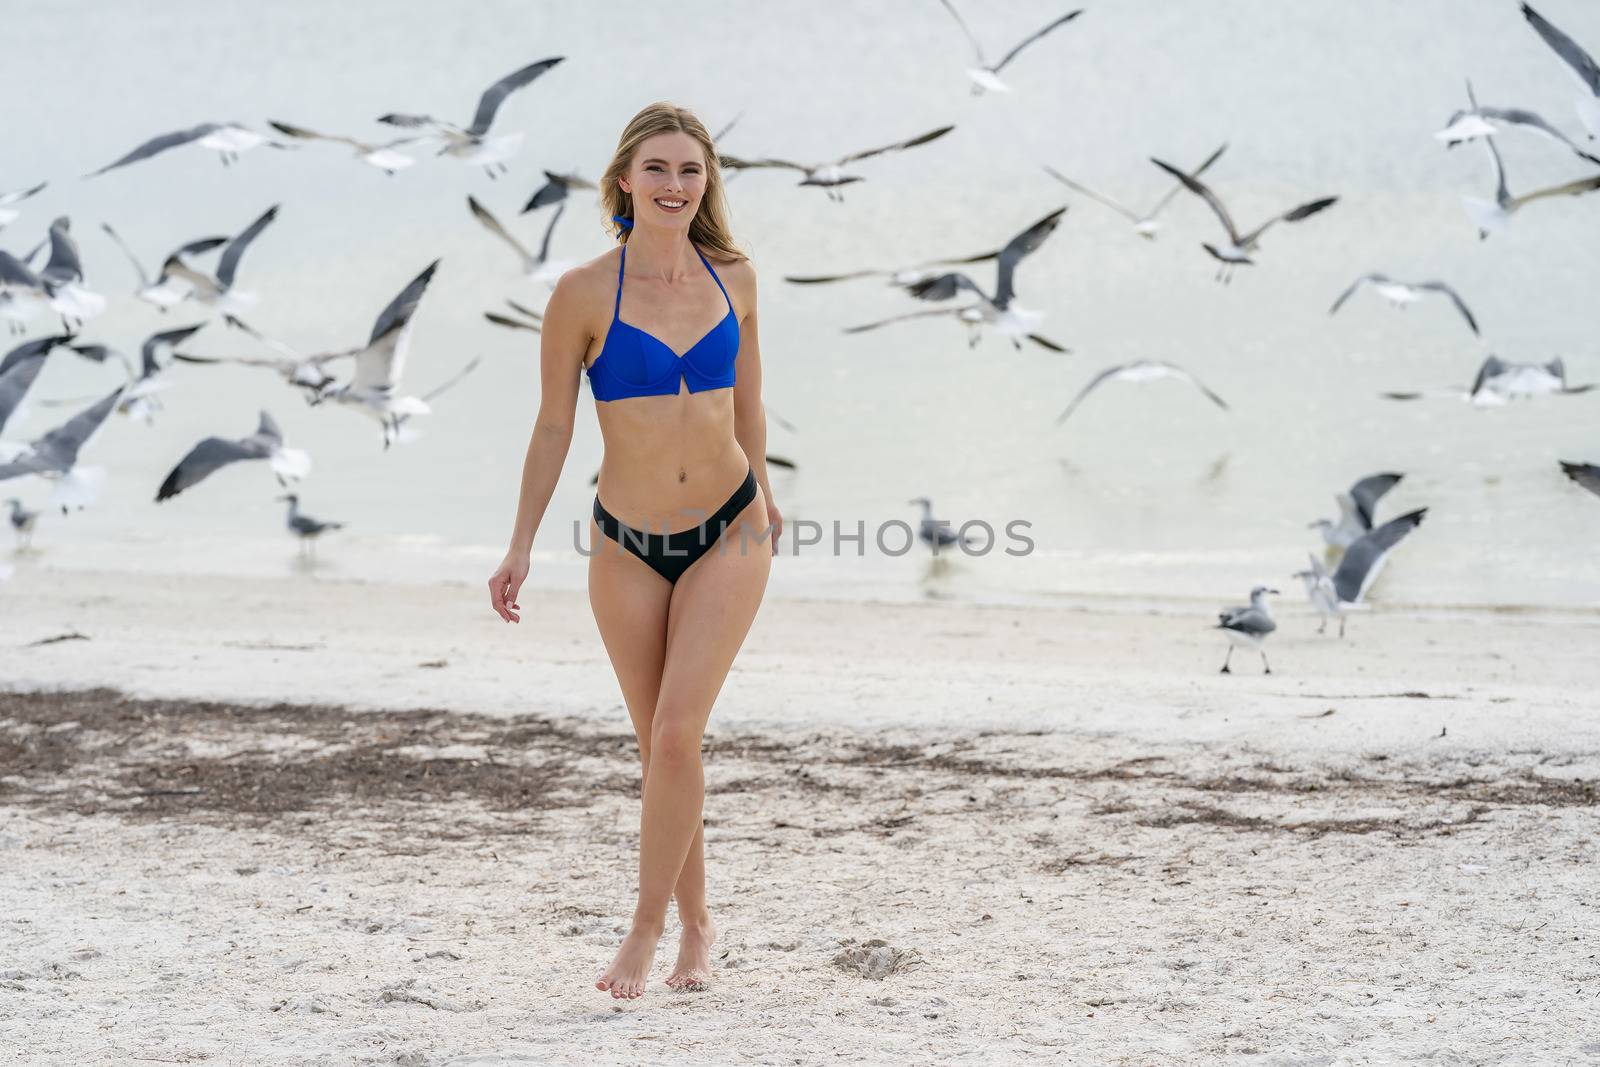 A beautiful blonde bikini model enjoys the weather outdoors on the beach while chasing seagulls